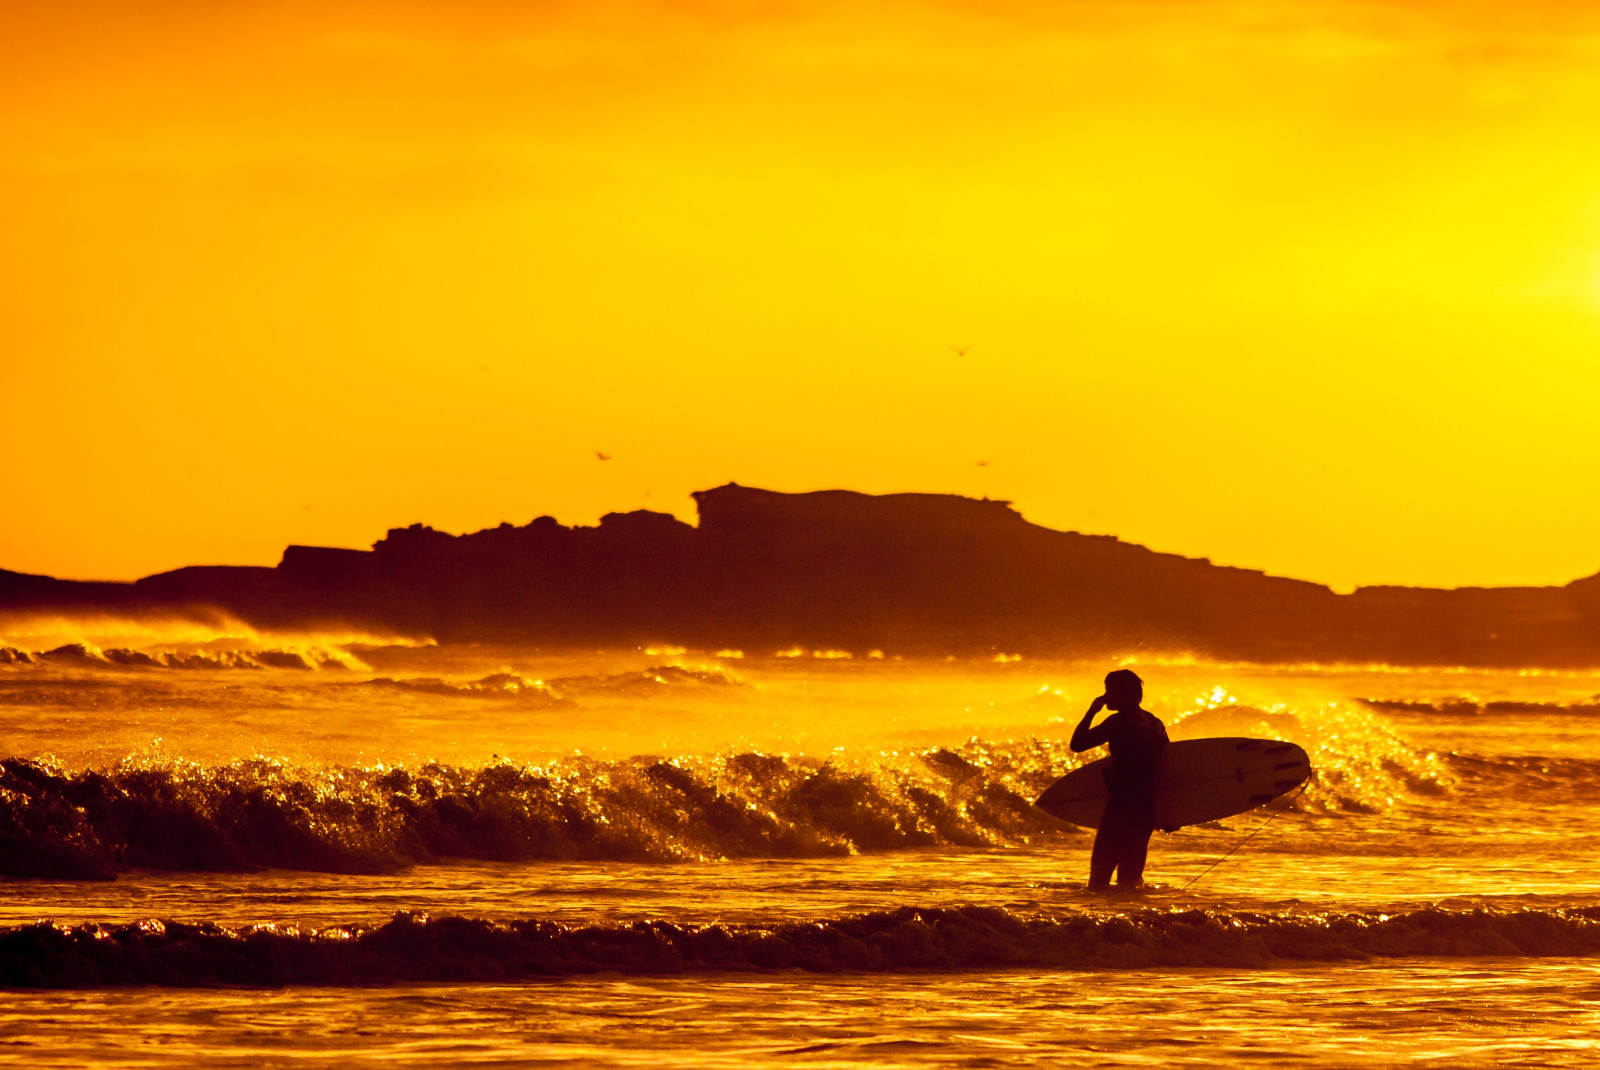 A black silhouette of a person carrying a surfboard with waves crashing and an orange sunset in Mexico.